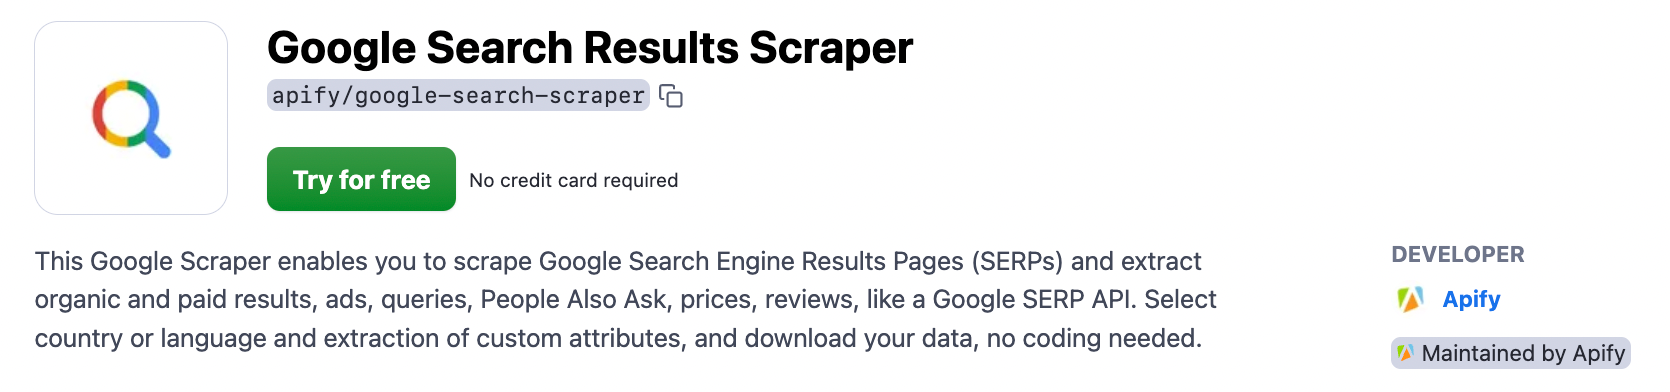 Google Search Results Scraper's page on Apify Store